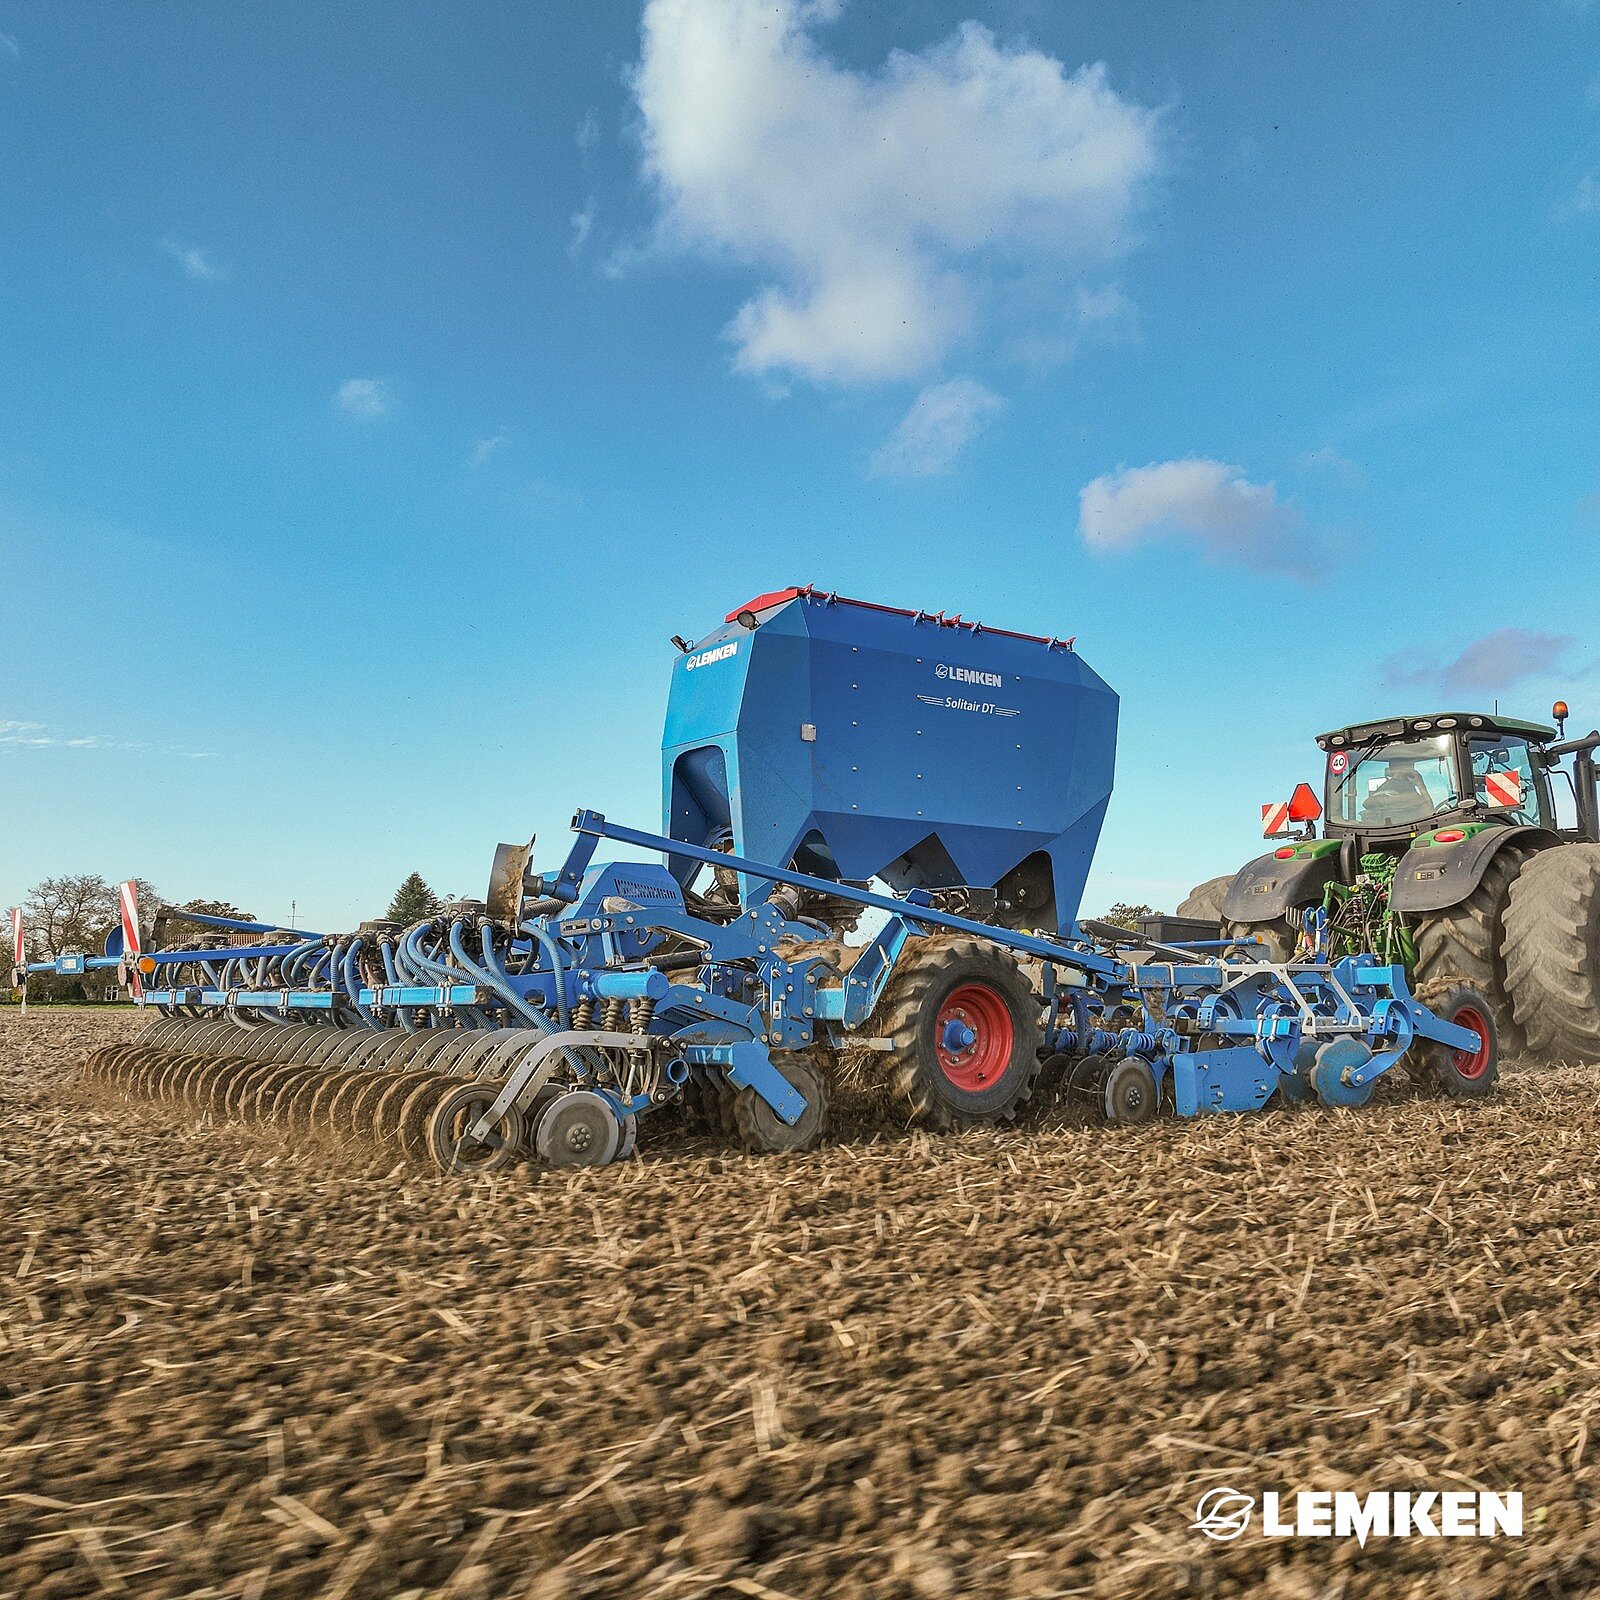 Many possibilities for placement 💪💙 With 5,100 litres in the double hopper version, the seed hopper of the six-metre...